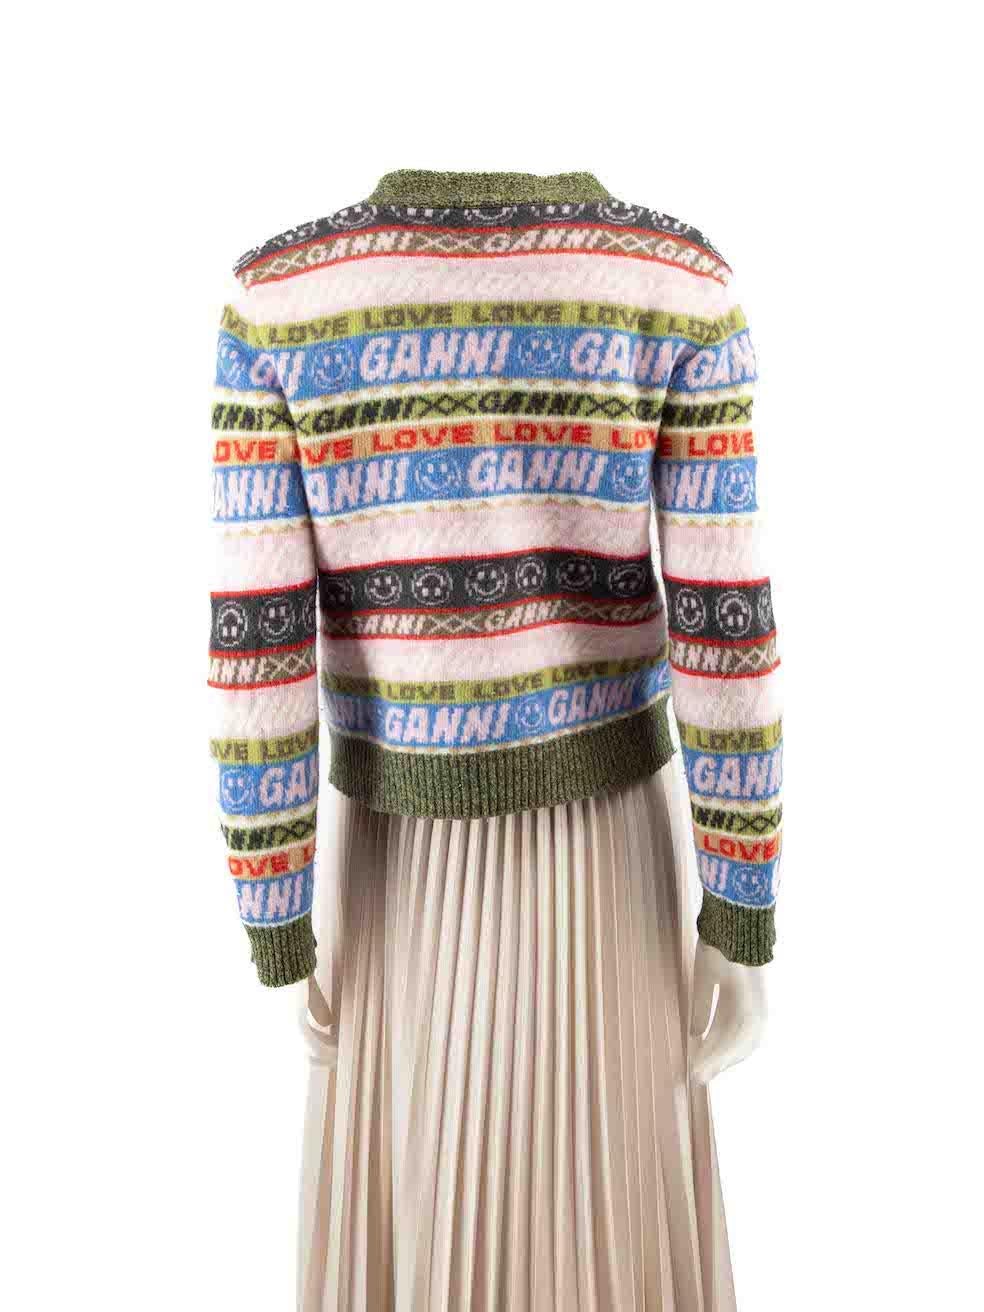 Ganni Logo Print Striped Cardigan Size M In Good Condition For Sale In London, GB